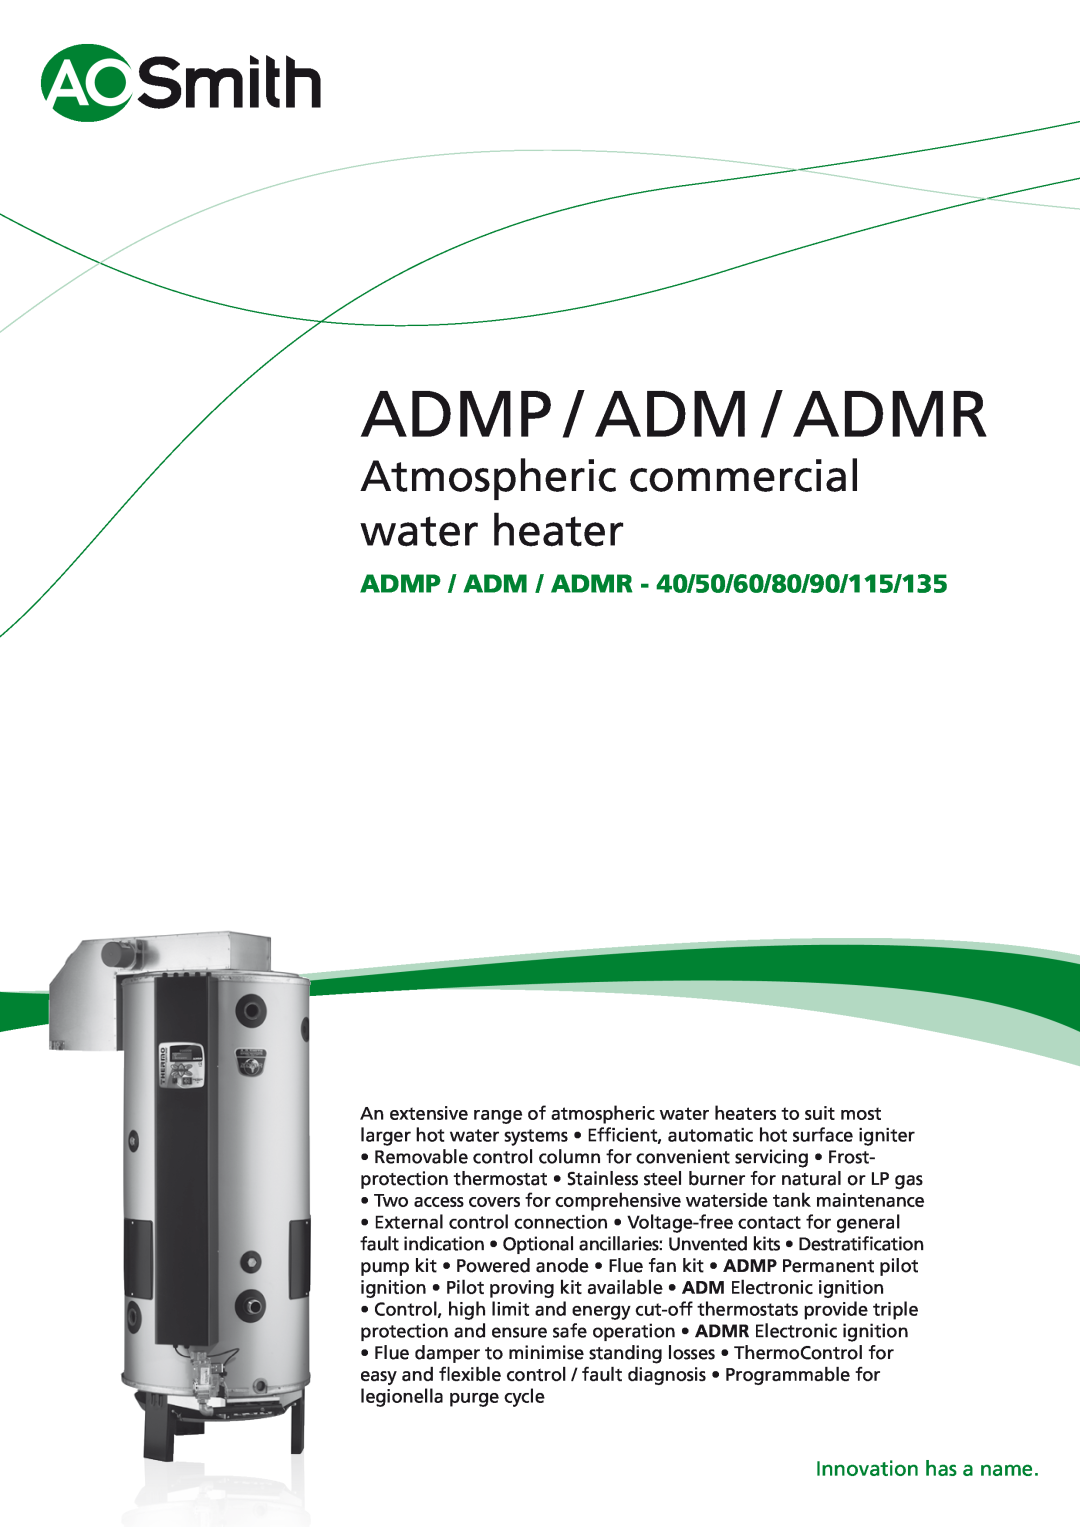 A.O. Smith ADMR - 90, ADMR - 80 manual Admp / Adm / Admr, Atmospheric commercial water heater, Innovation has a name 